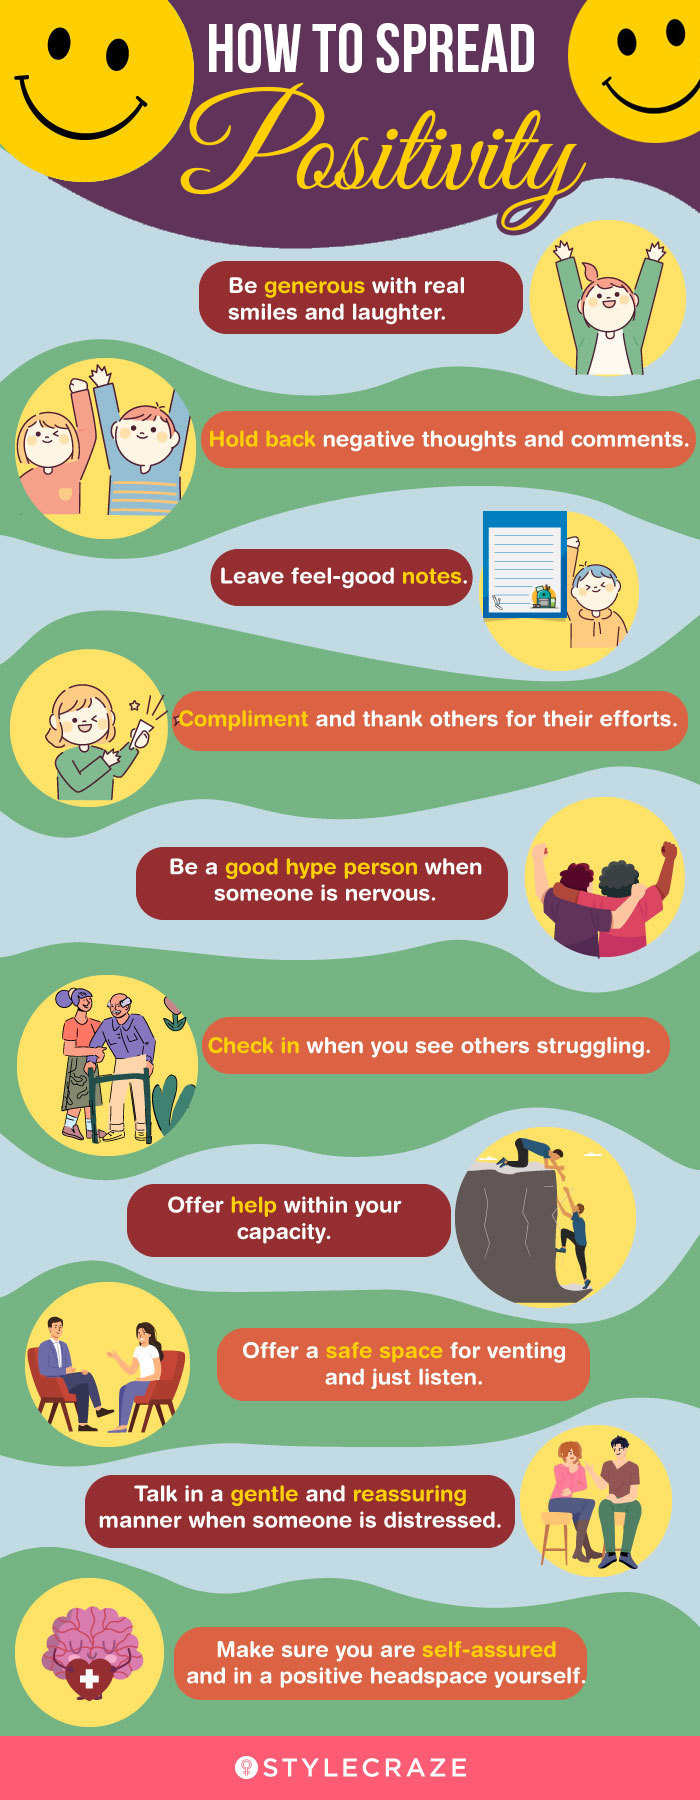 how to spread positivity (infographic)